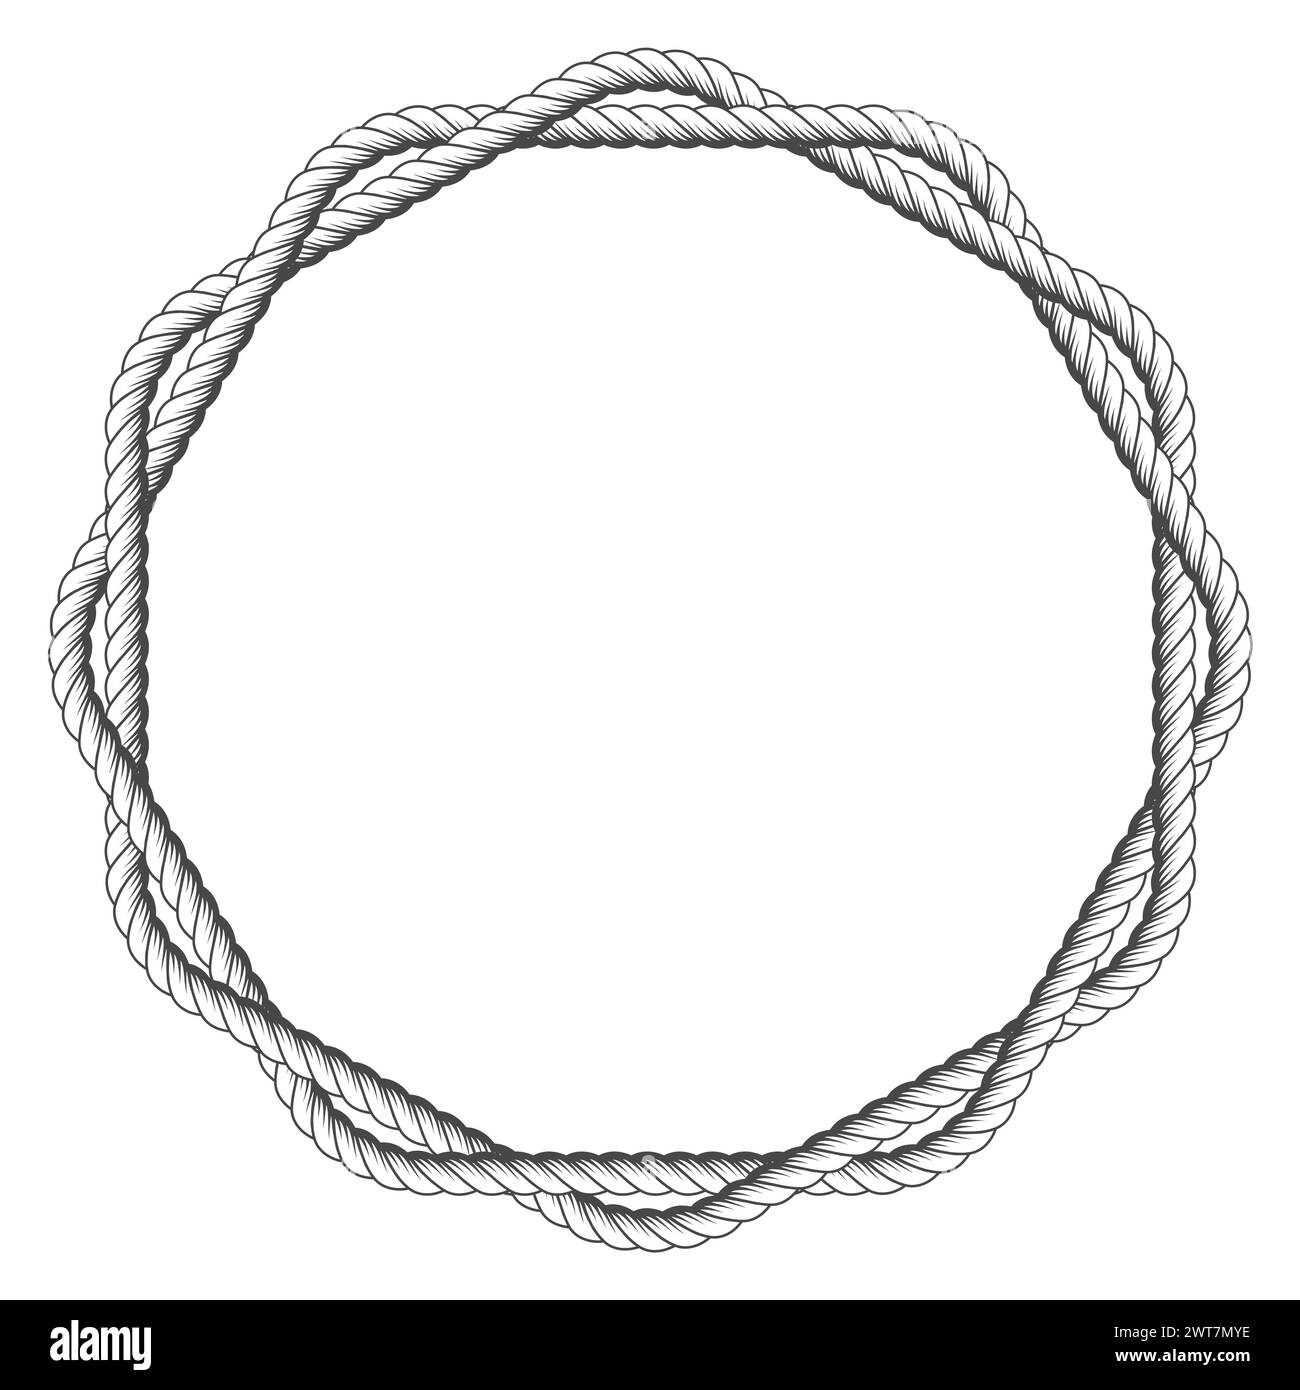 Rope ring frame with two interlacing strings, nautical round frame, vector Stock Vector